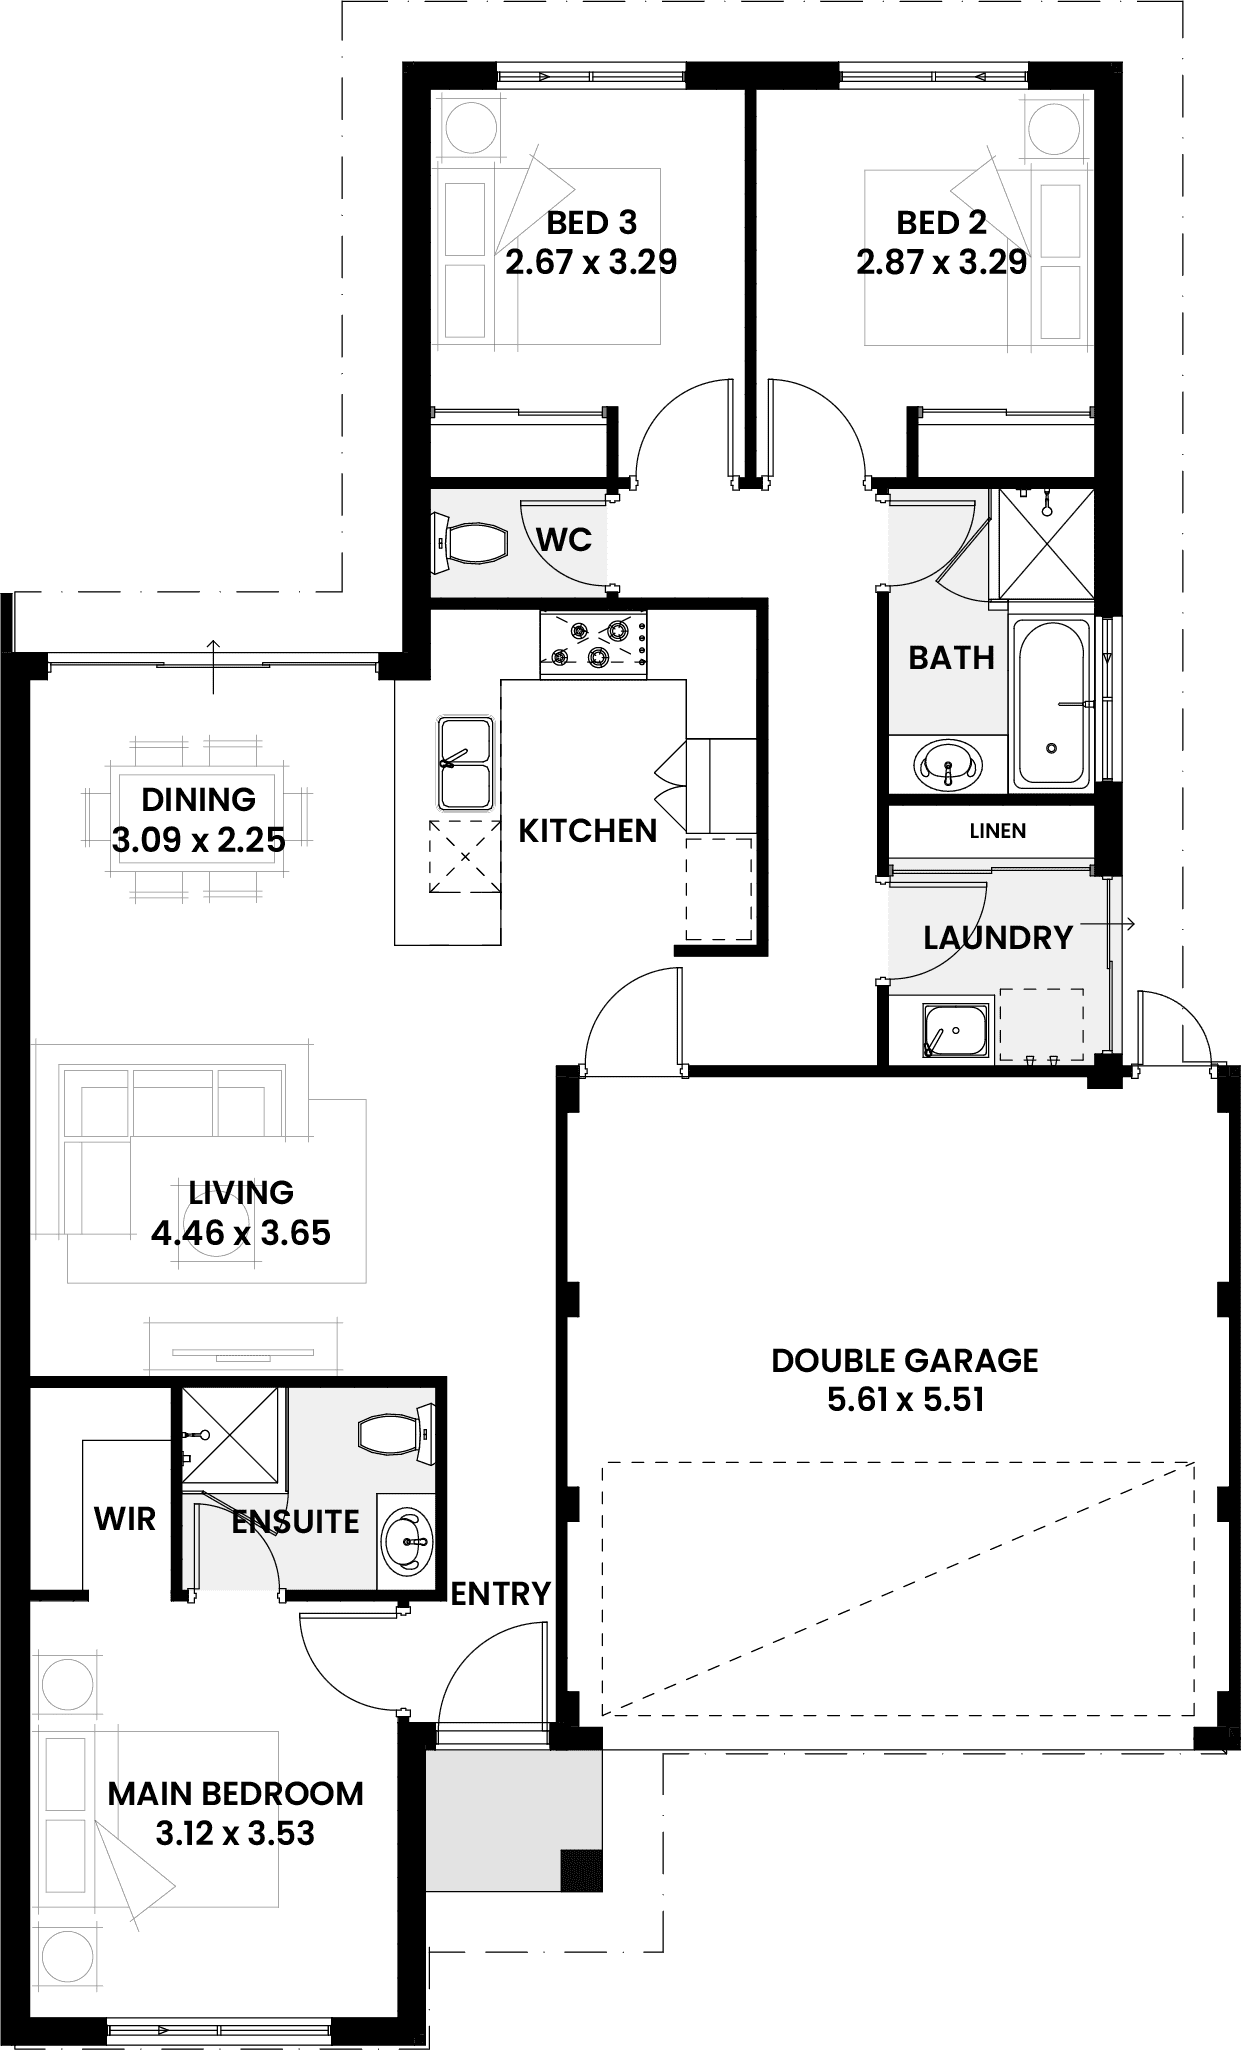 Floorplan for The Sandalwood, a Move Homes new home design perfect for first time buyers and new builders in Perth